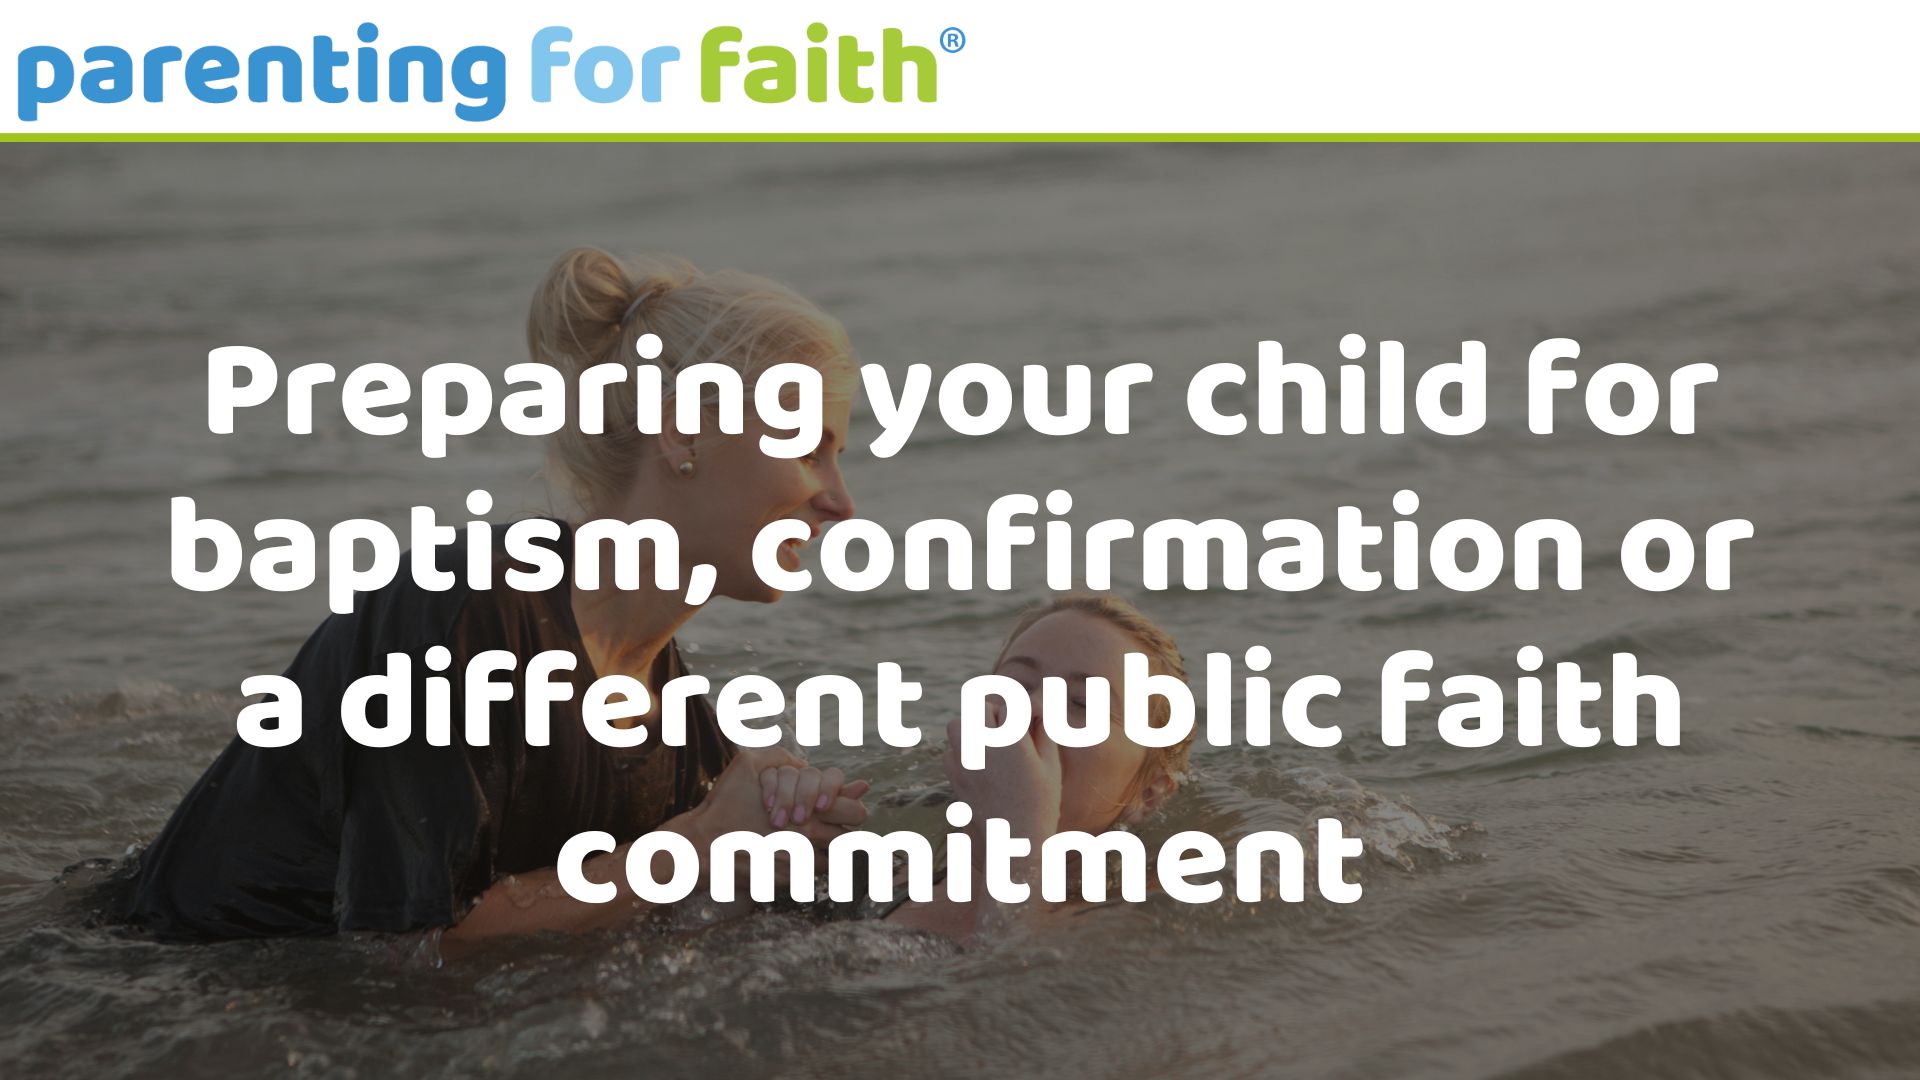 Preparing your child for baptism confirmation or a different public faith commitment image credit hept from Getty Images Signature